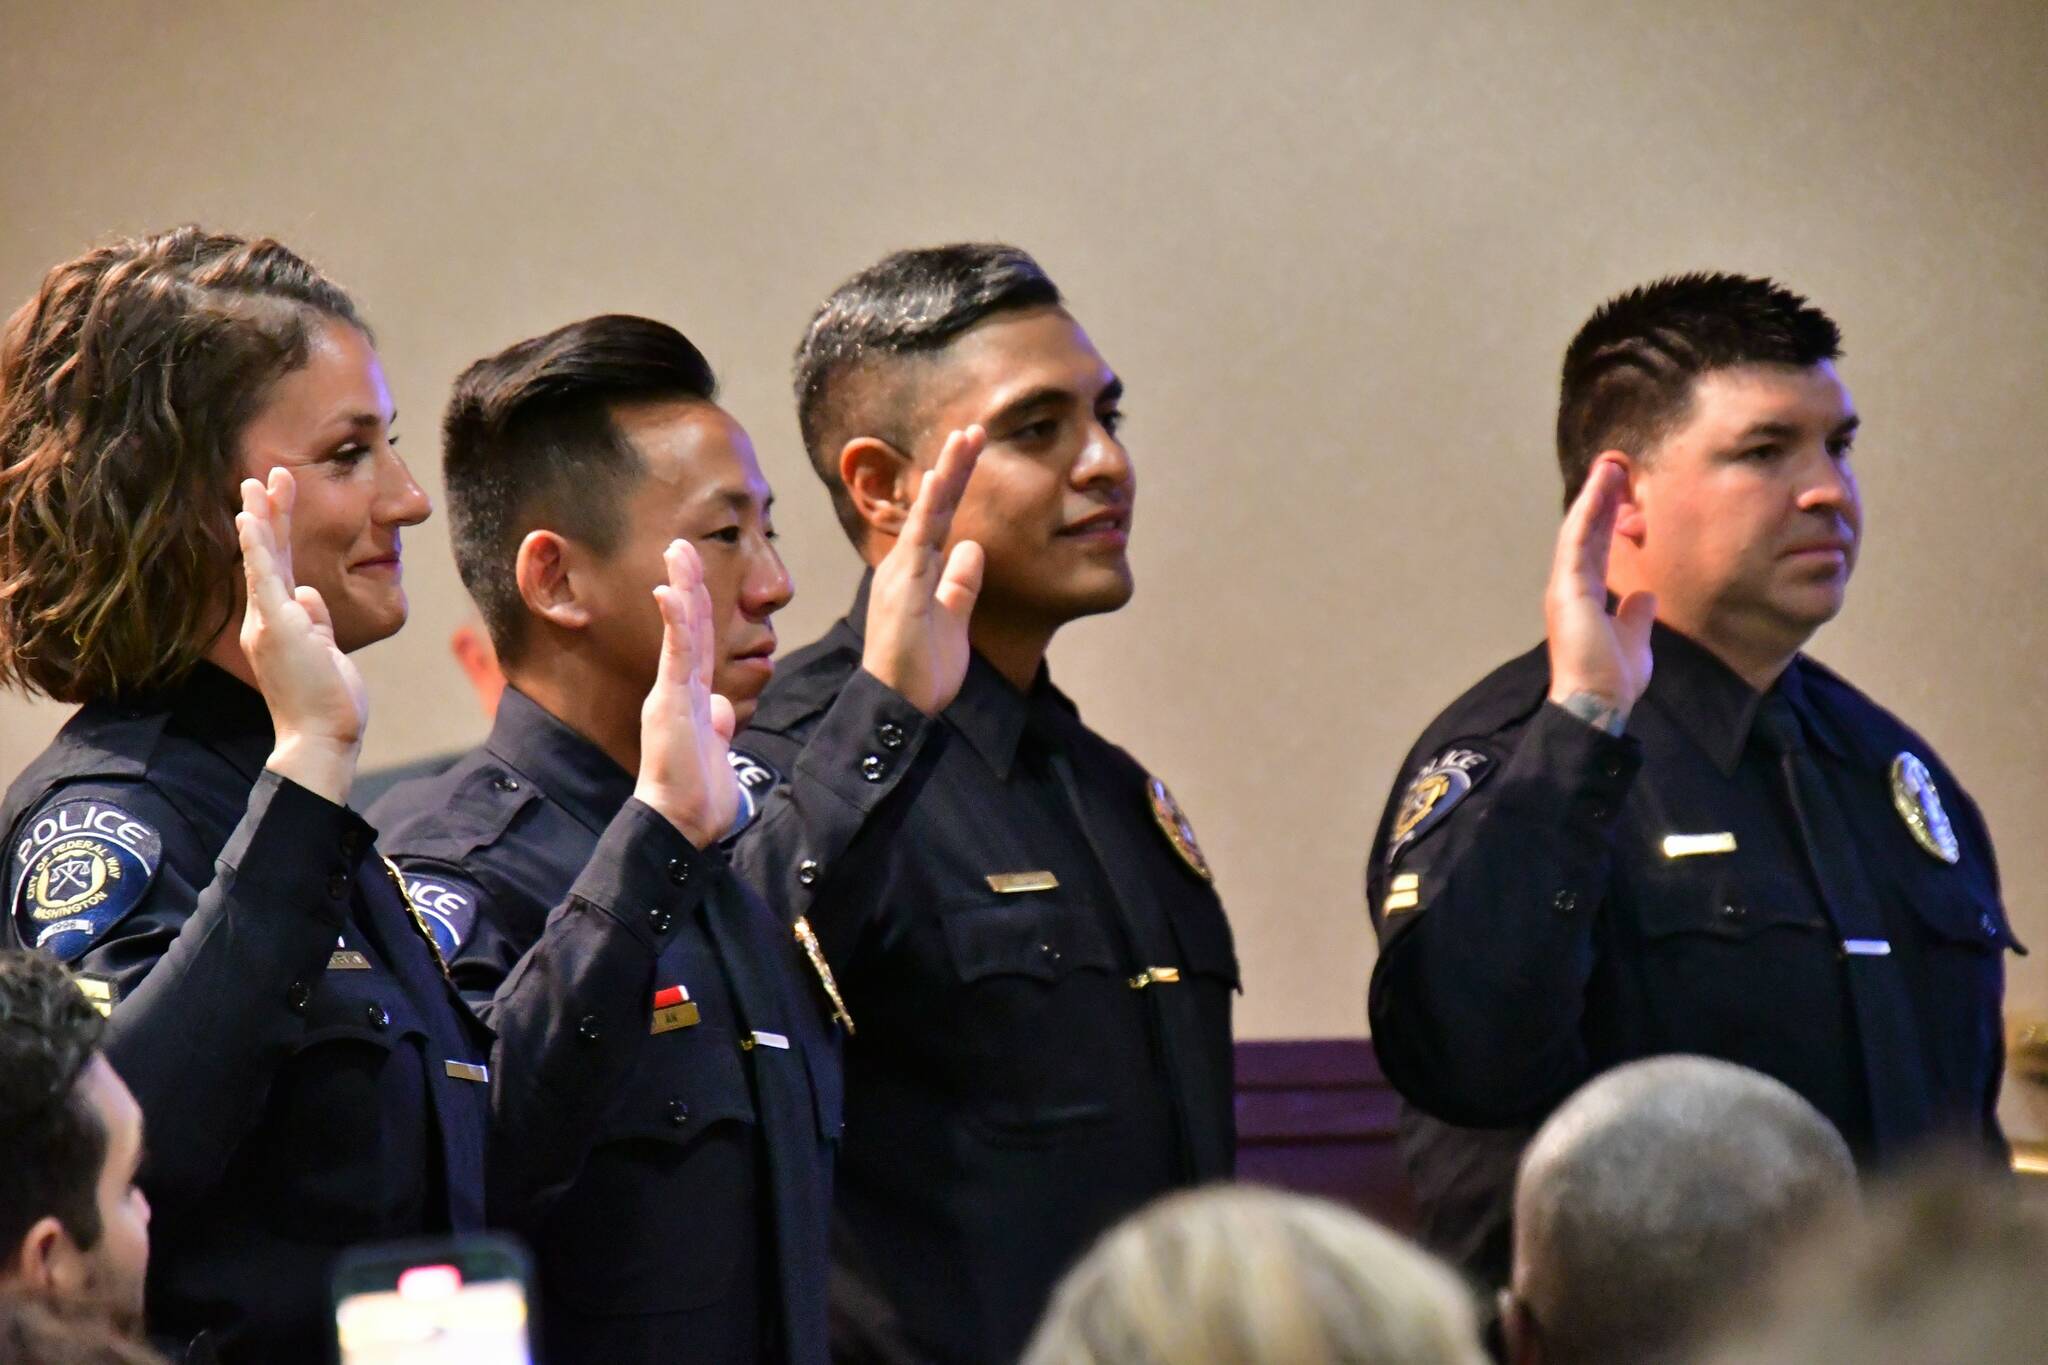 Photo by Bruce Honda. 
From left to right: Corporals Hilary Mariani, Jae An, Ricardo Cuellar and Eric Reyna are sworn in during the July 5, 2023 city council meeting.